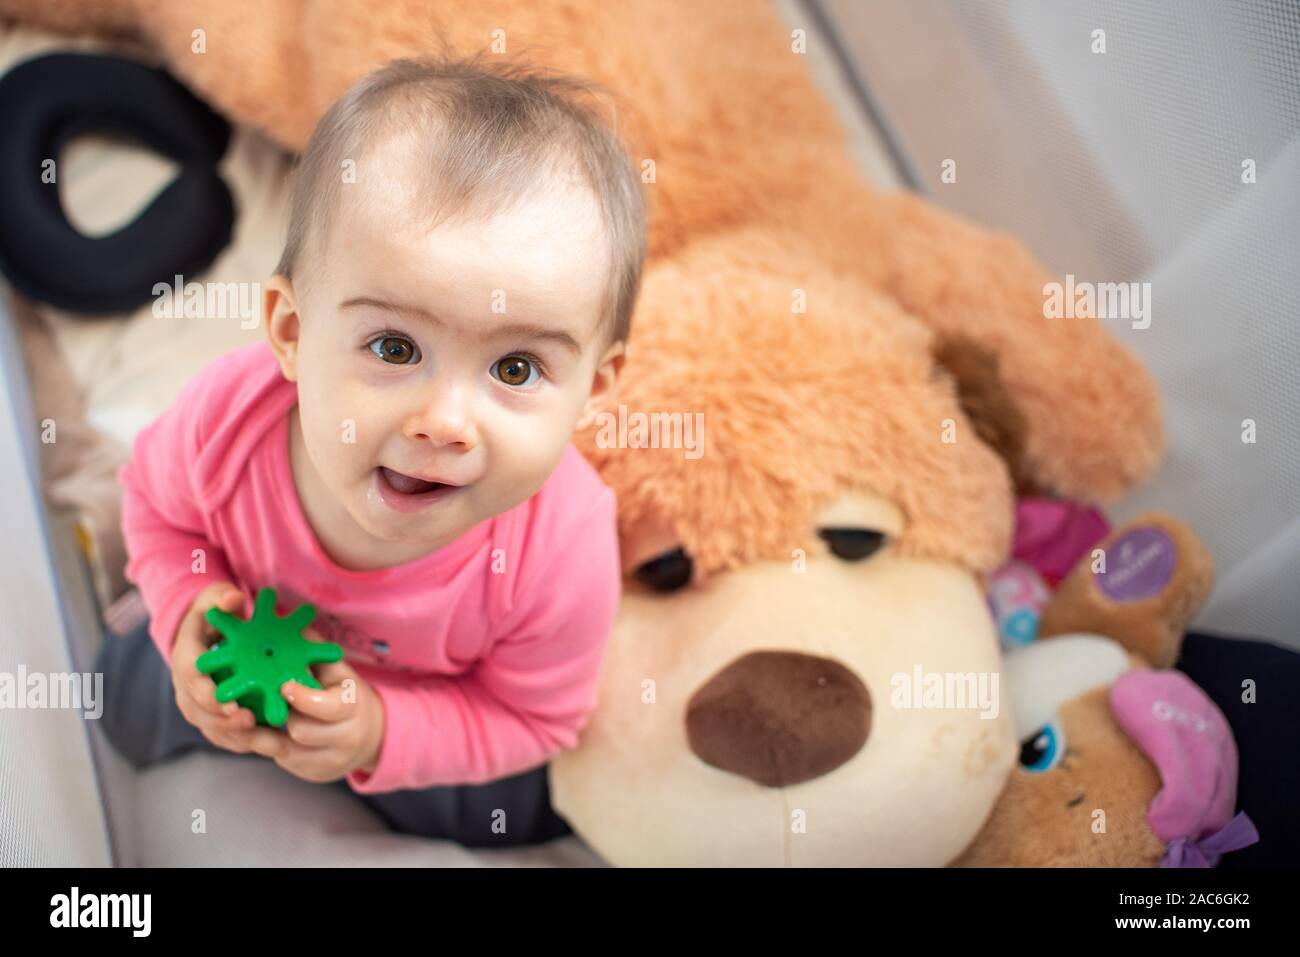 Adorable baby in crib looking up with rubber toy in hands. Copy space on right Stock Photo